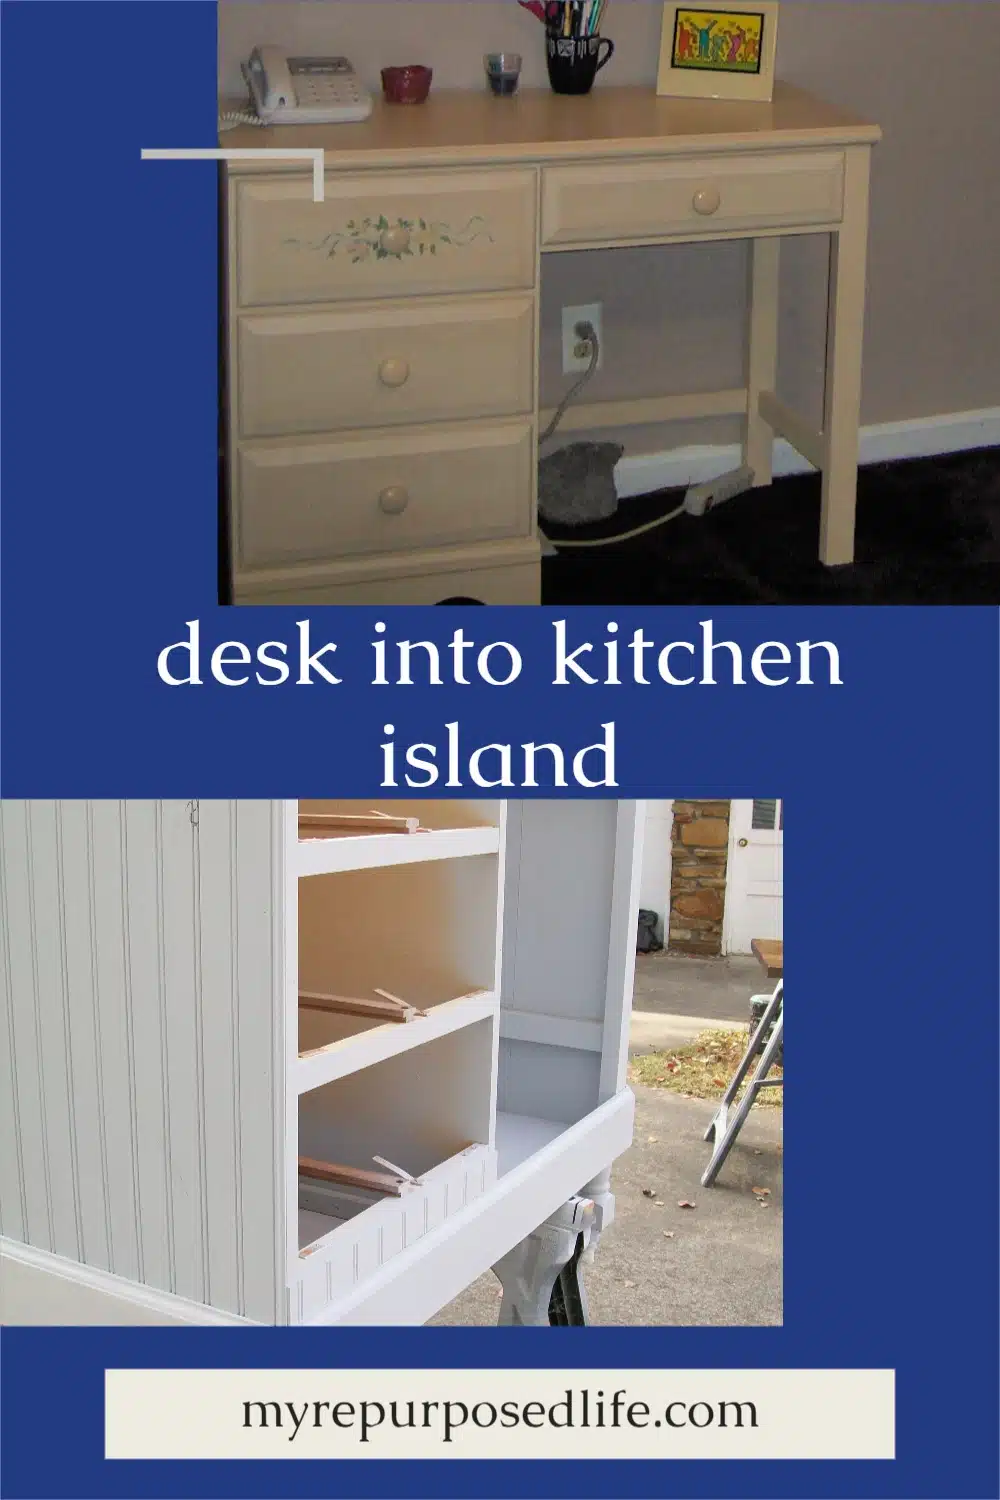 How to make a unique and useful DIY kitchen island or craft station out of an old desk. Raised to a comfortable height, perfect for cooking or crafting! #MyRepurposedLife #repurposed #upcycle #desk #kitchenisland #crafts #craftstation via @repurposedlife